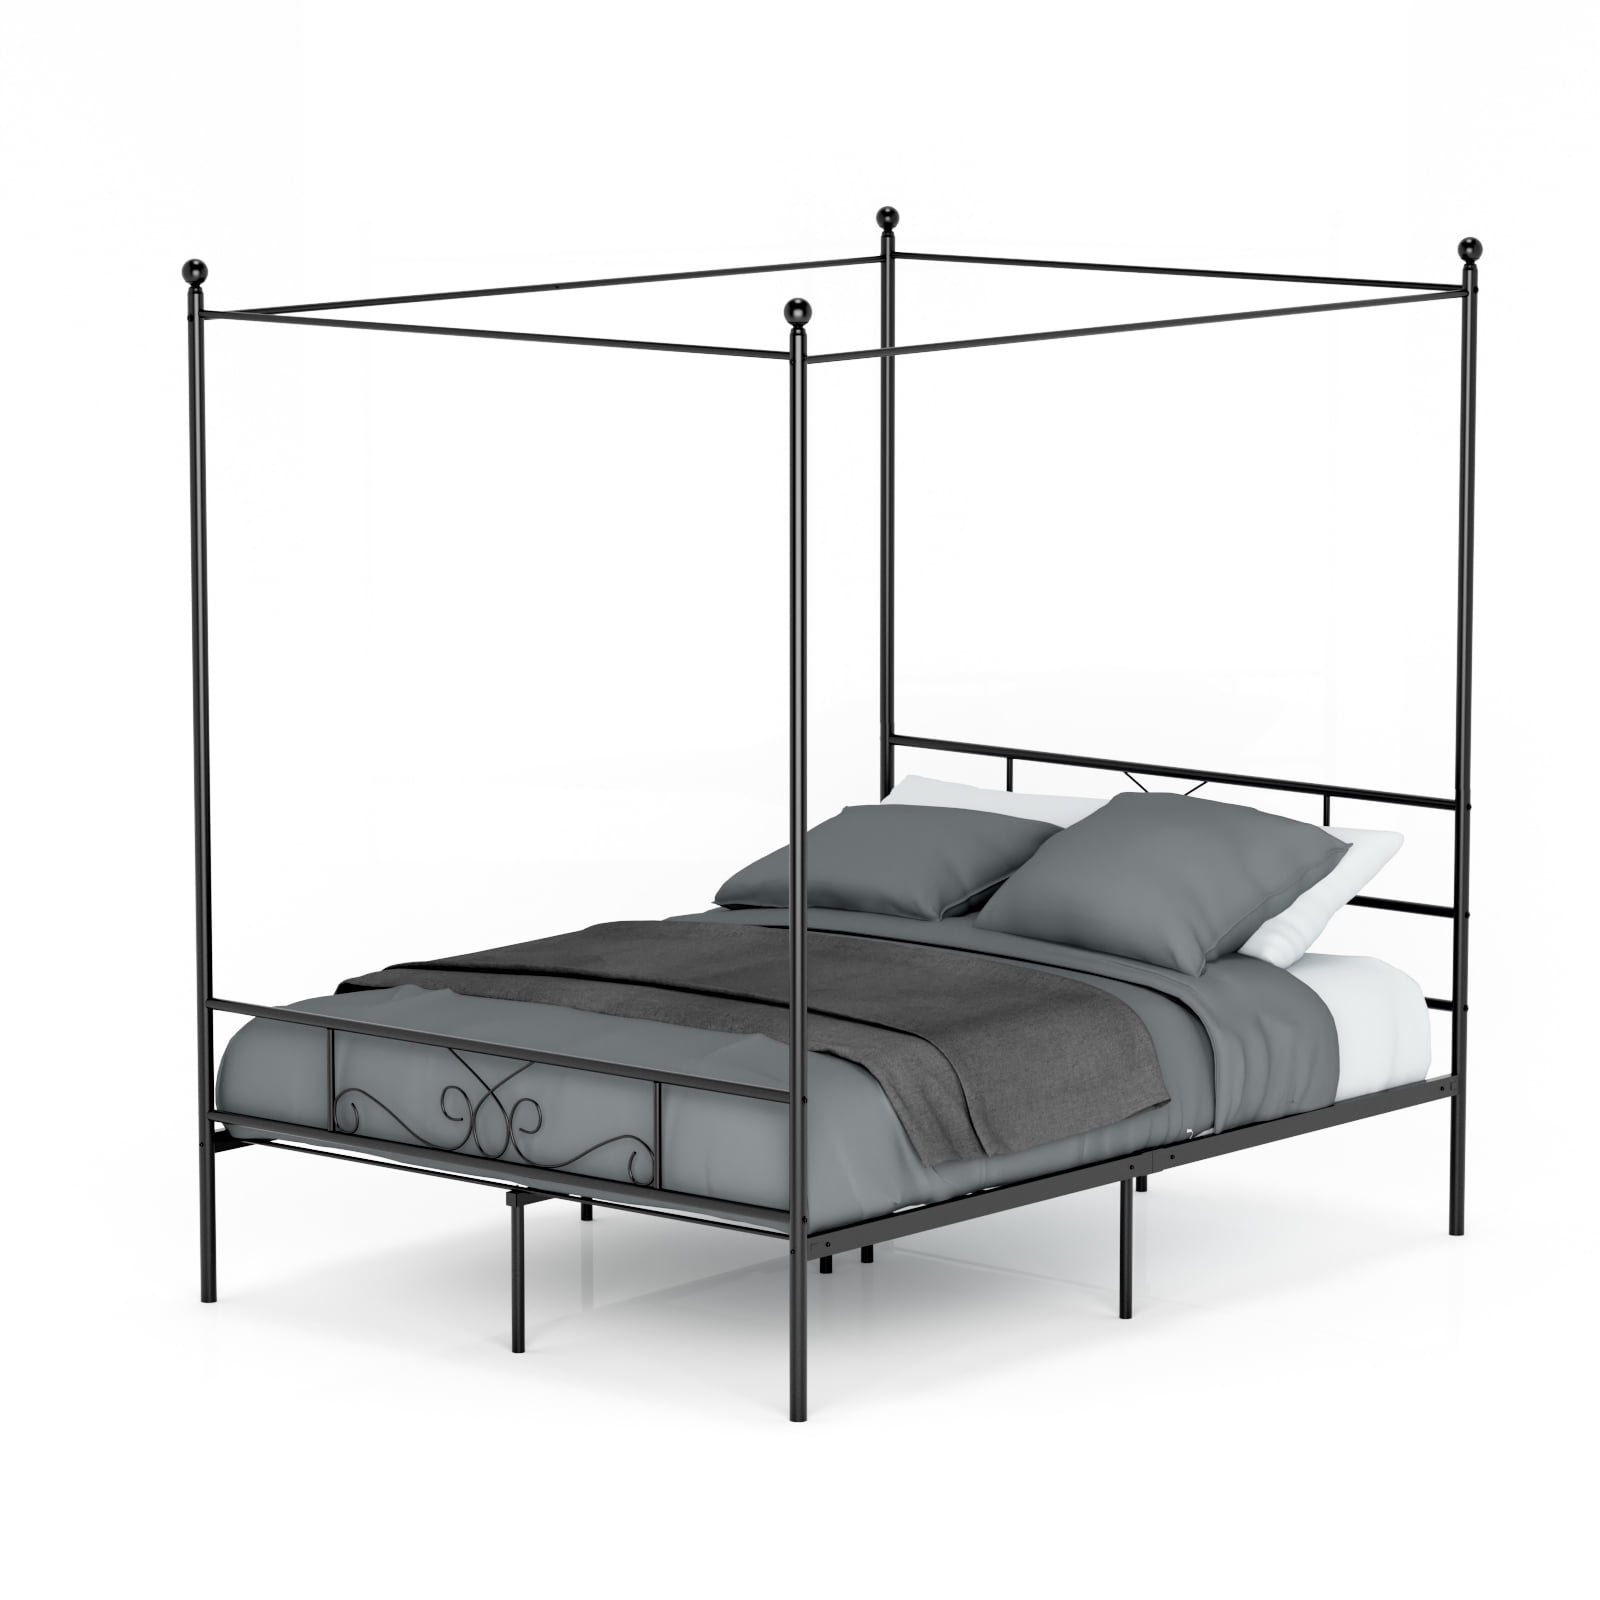 Queen Canopy Bed Frame 4 Poster Steel, White Full Size Canopy Bed Frame